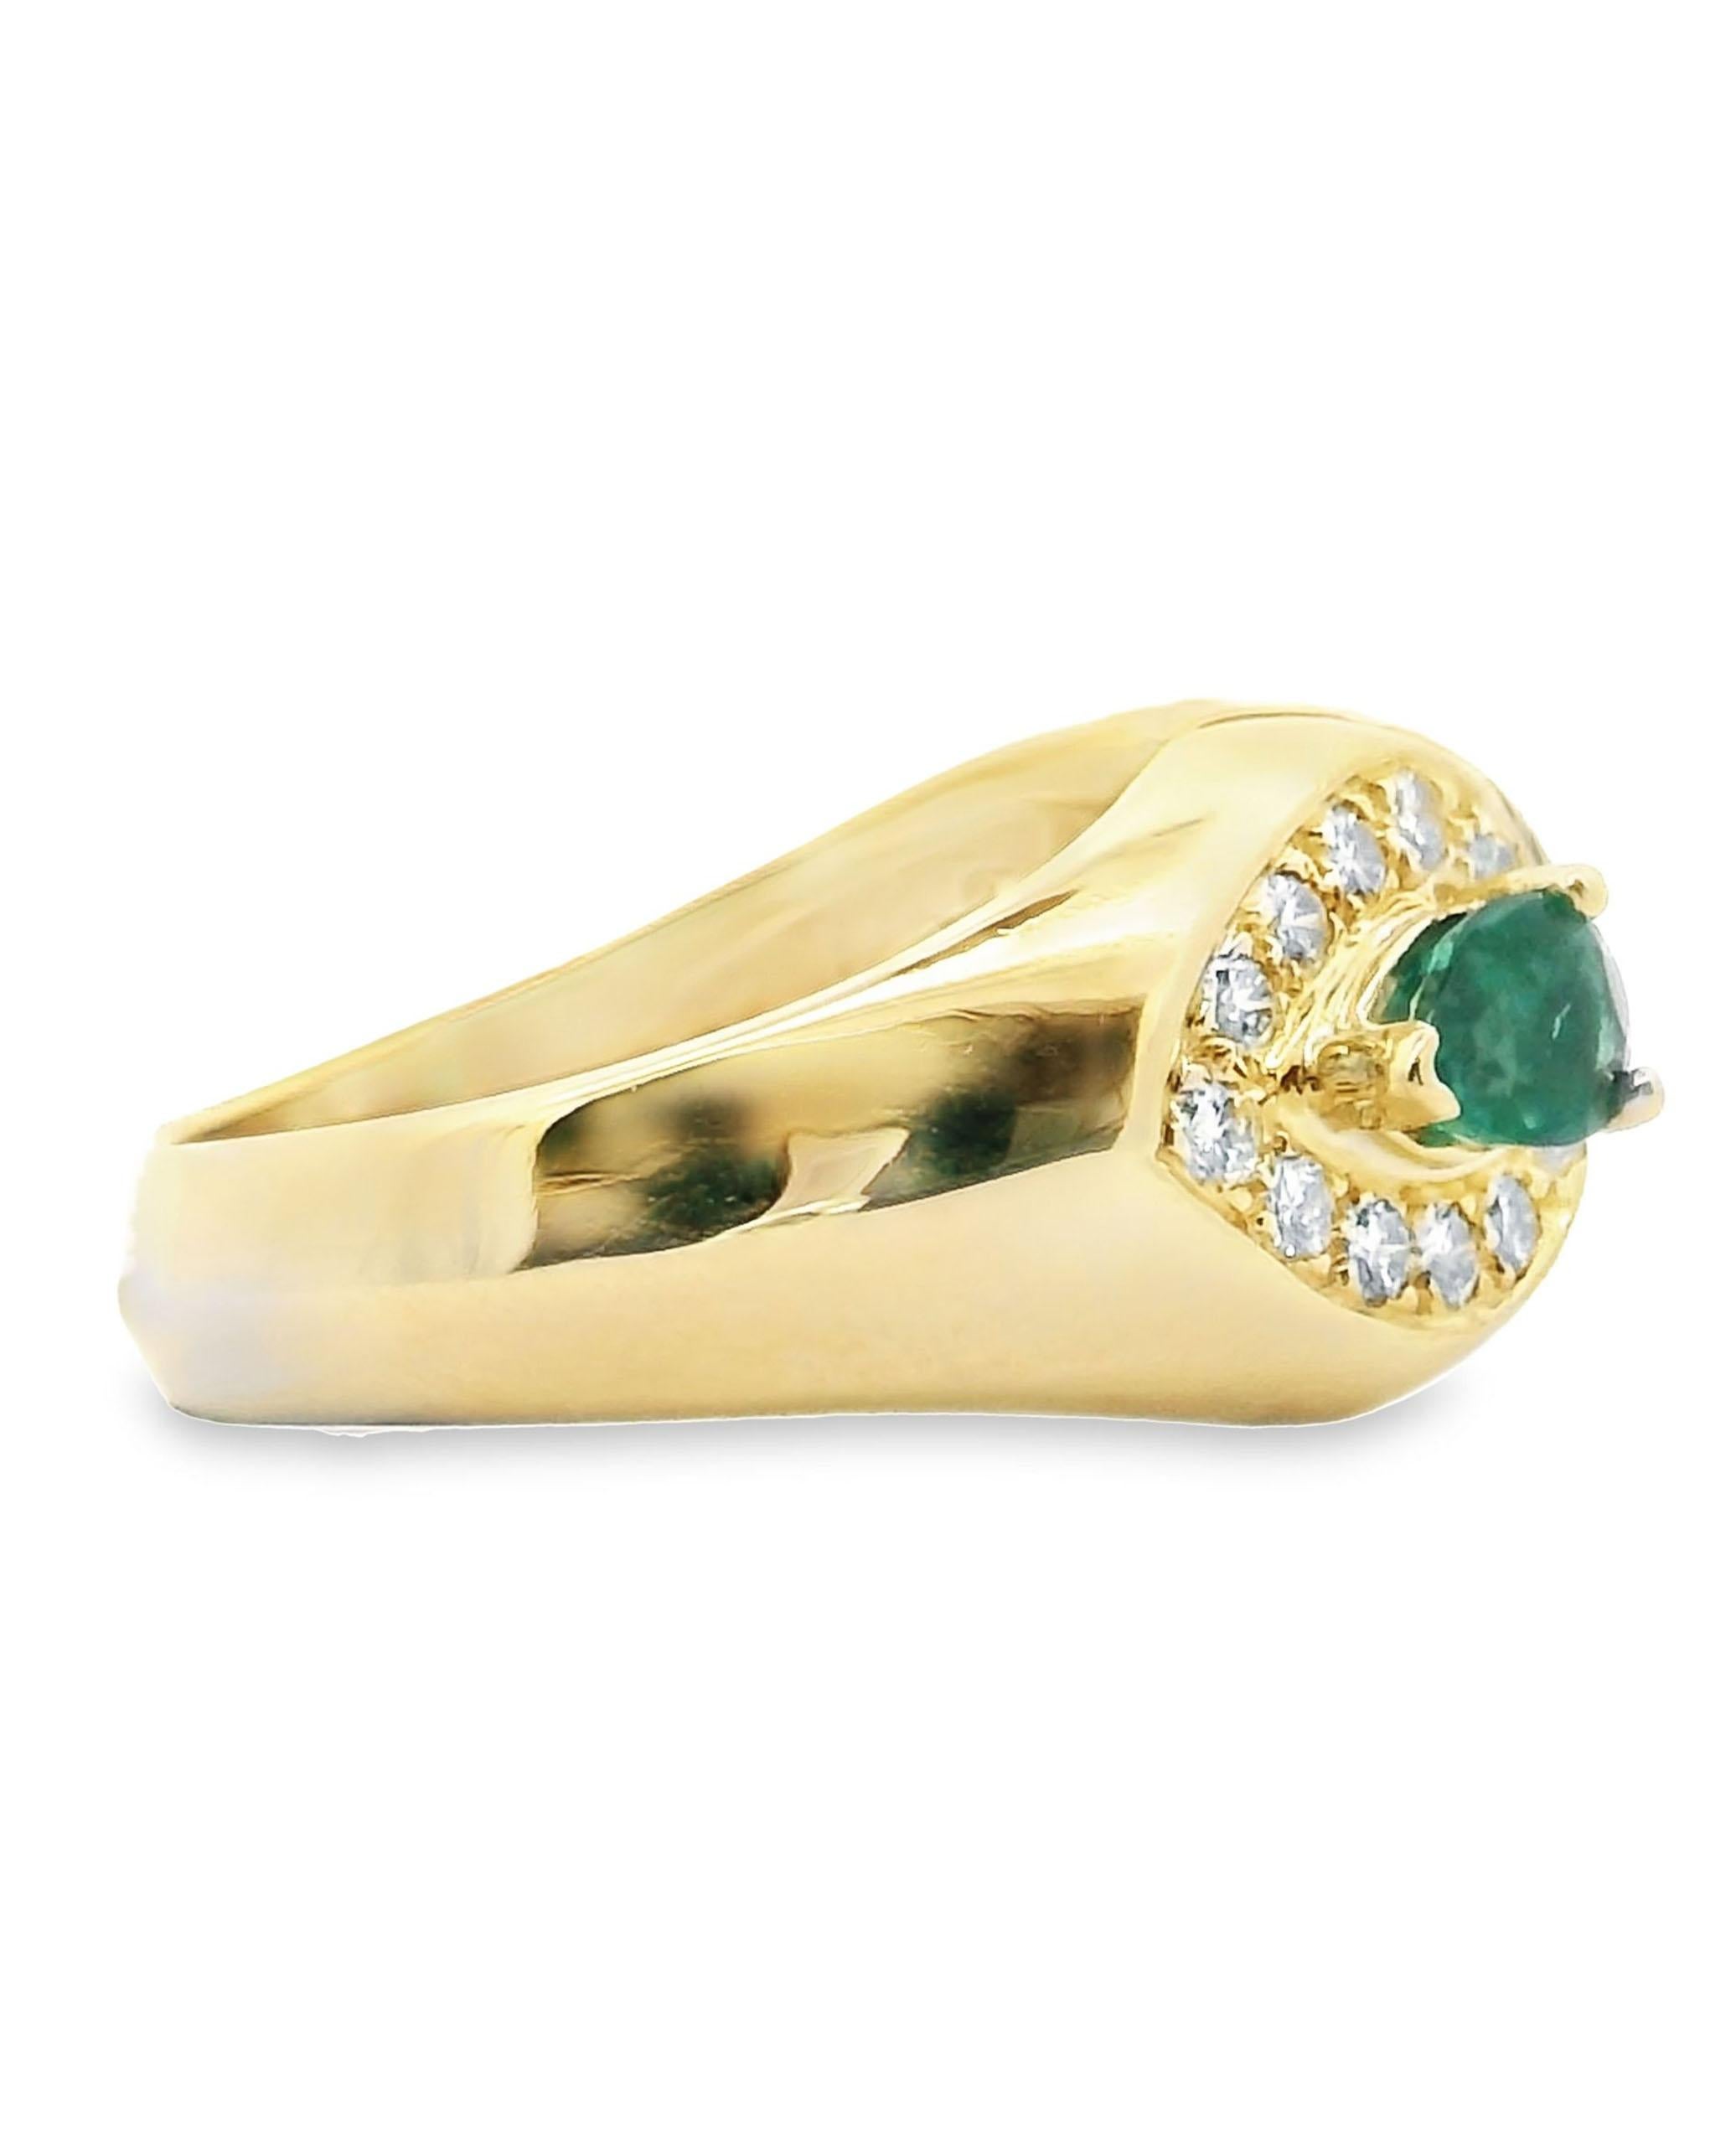 Pear Cut Vintage Emerald Ring with Diamonds Set in 18K Gold - Circa 1985 For Sale